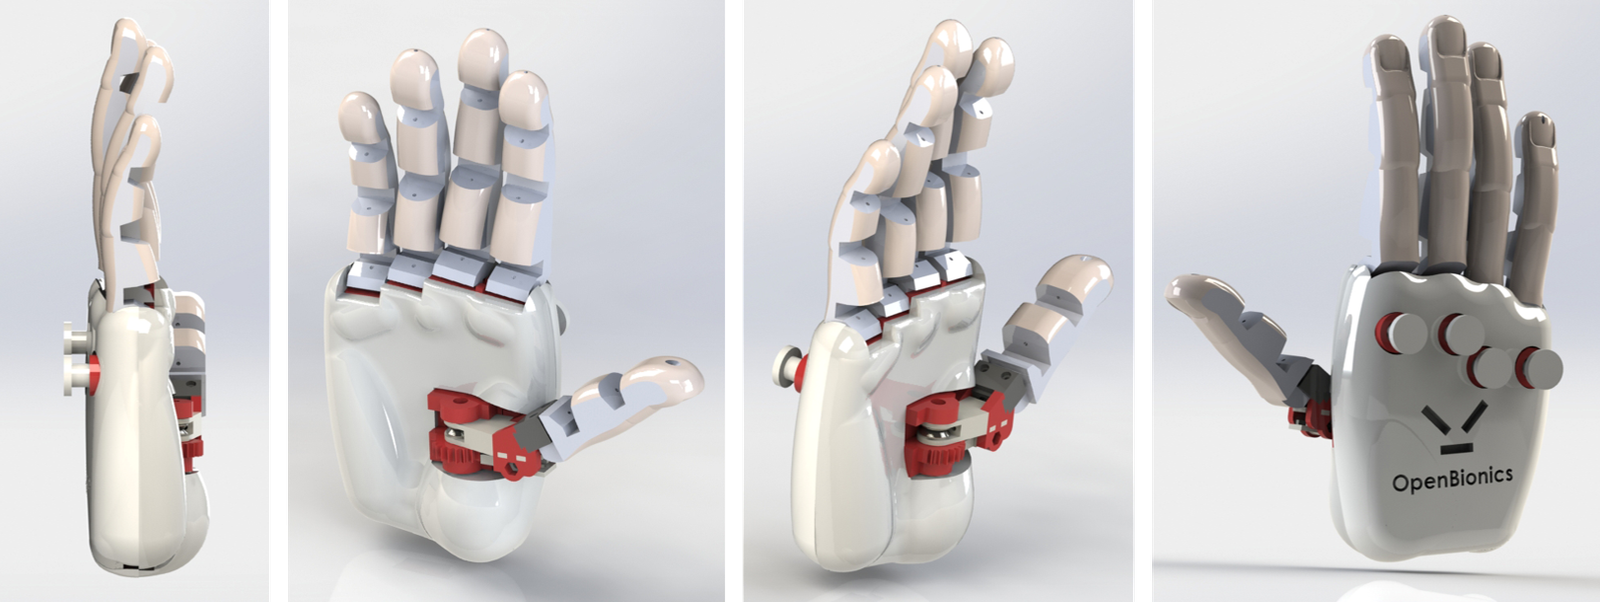 Augmented manipulation ability in humans with six-fingered hands